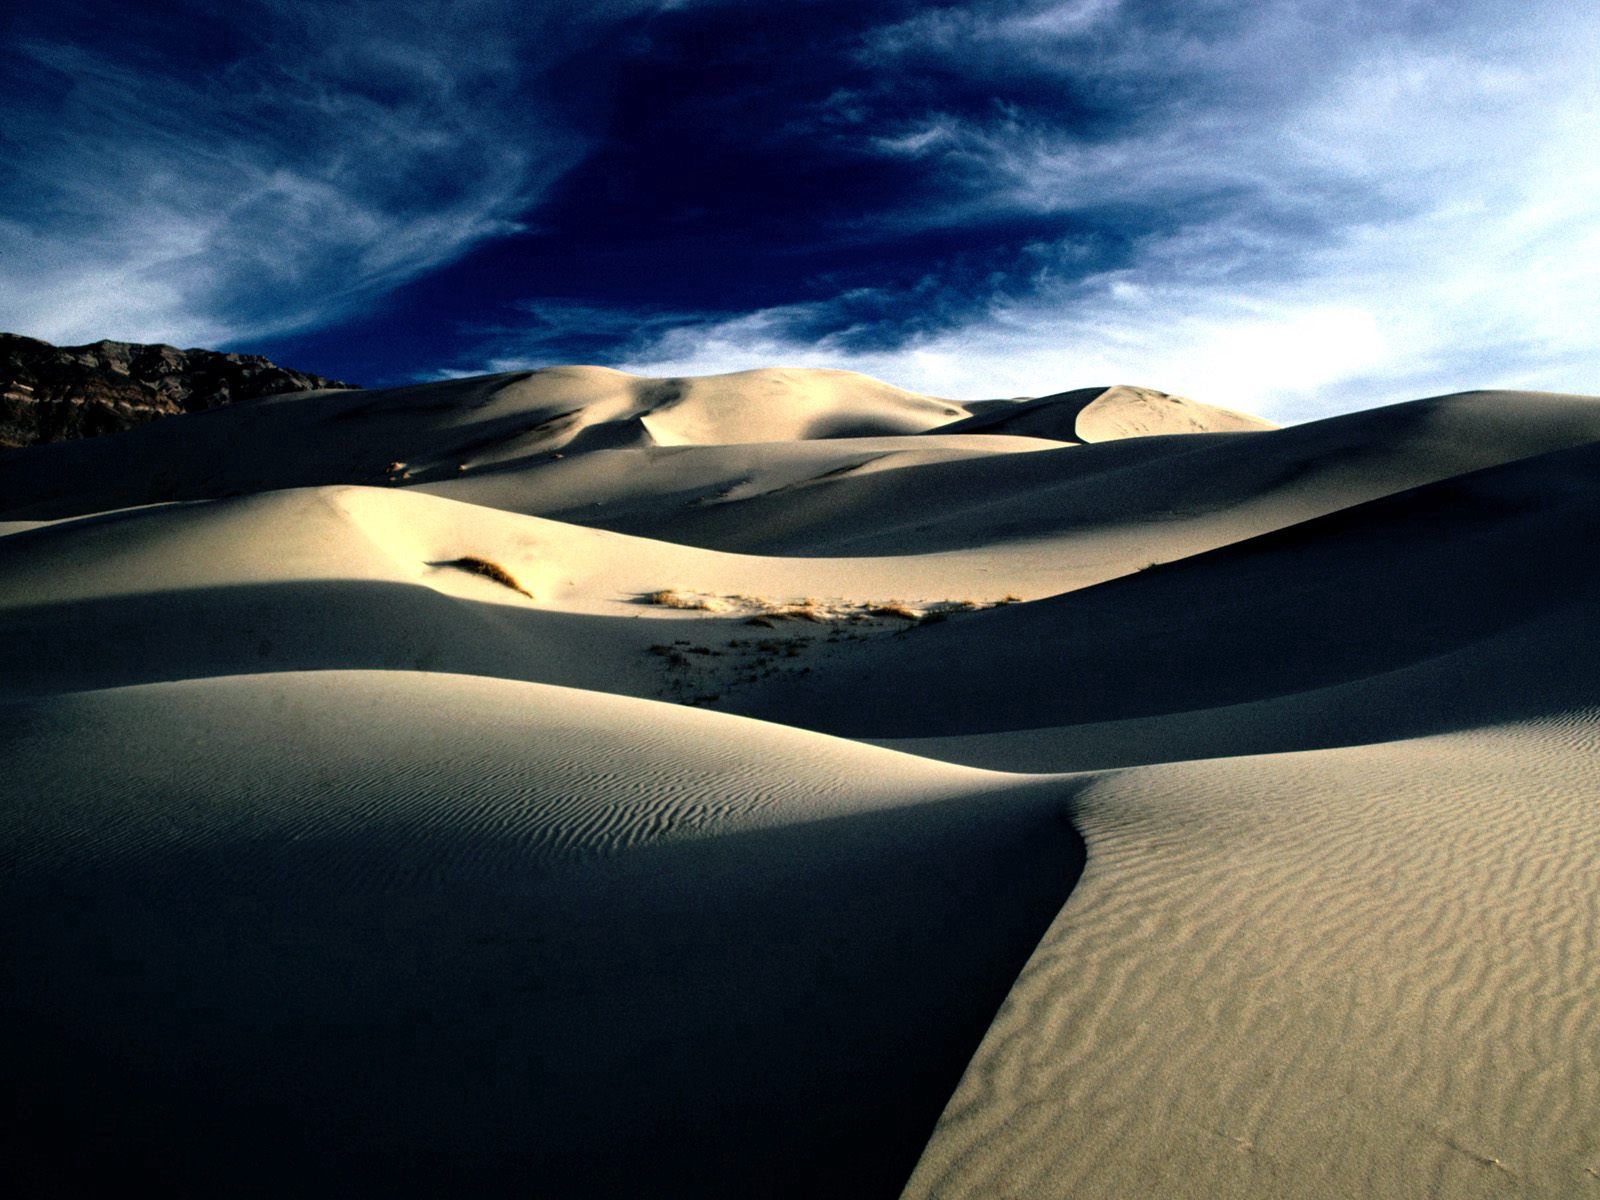 dunes, clouds, lines, nature, sky, mountains, sand, desert, shadows, links